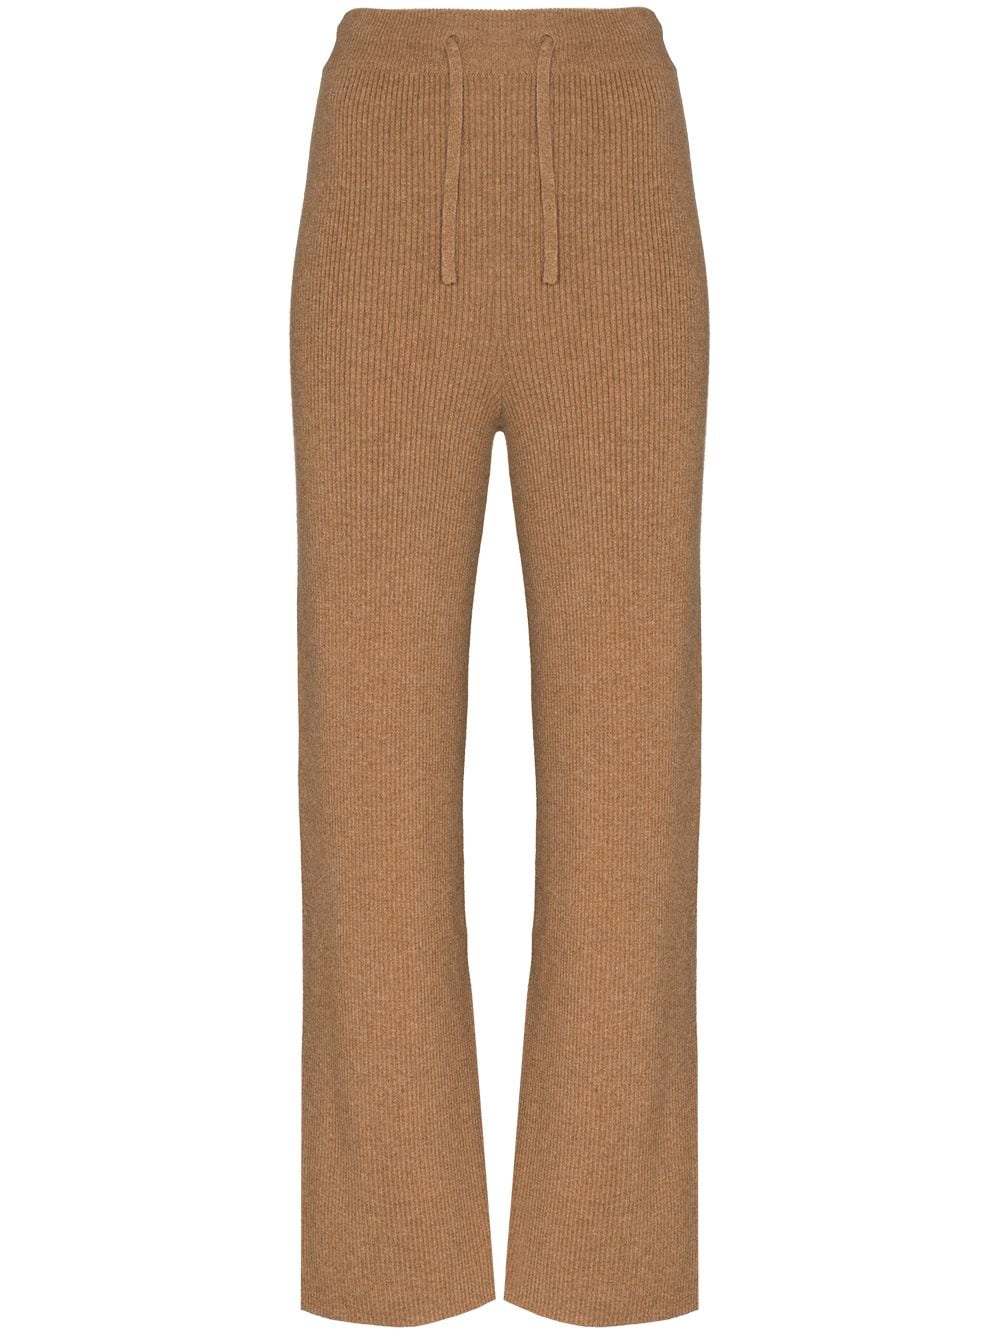 Lisa Yang Heather Knitted Ribbed Trousers - Farfetch